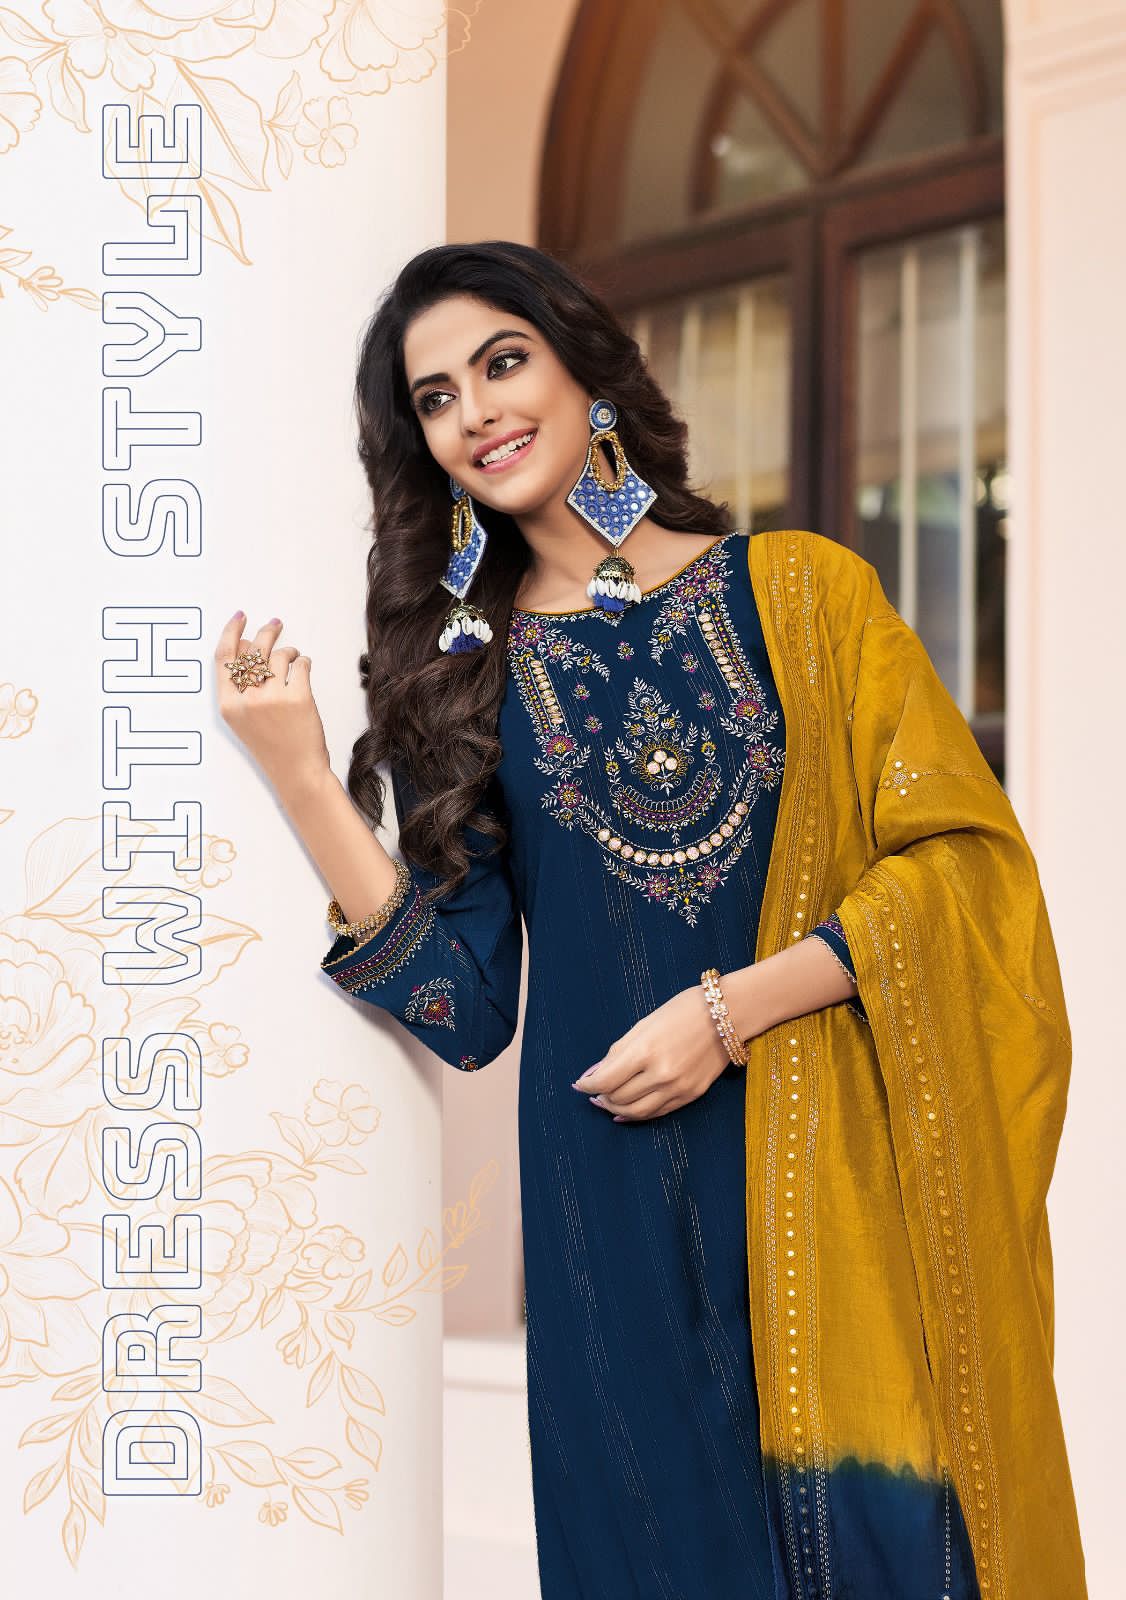 Pushpa Vol 3 Ladies Flavour Rayon Viscose Readymade Pant Style Suits